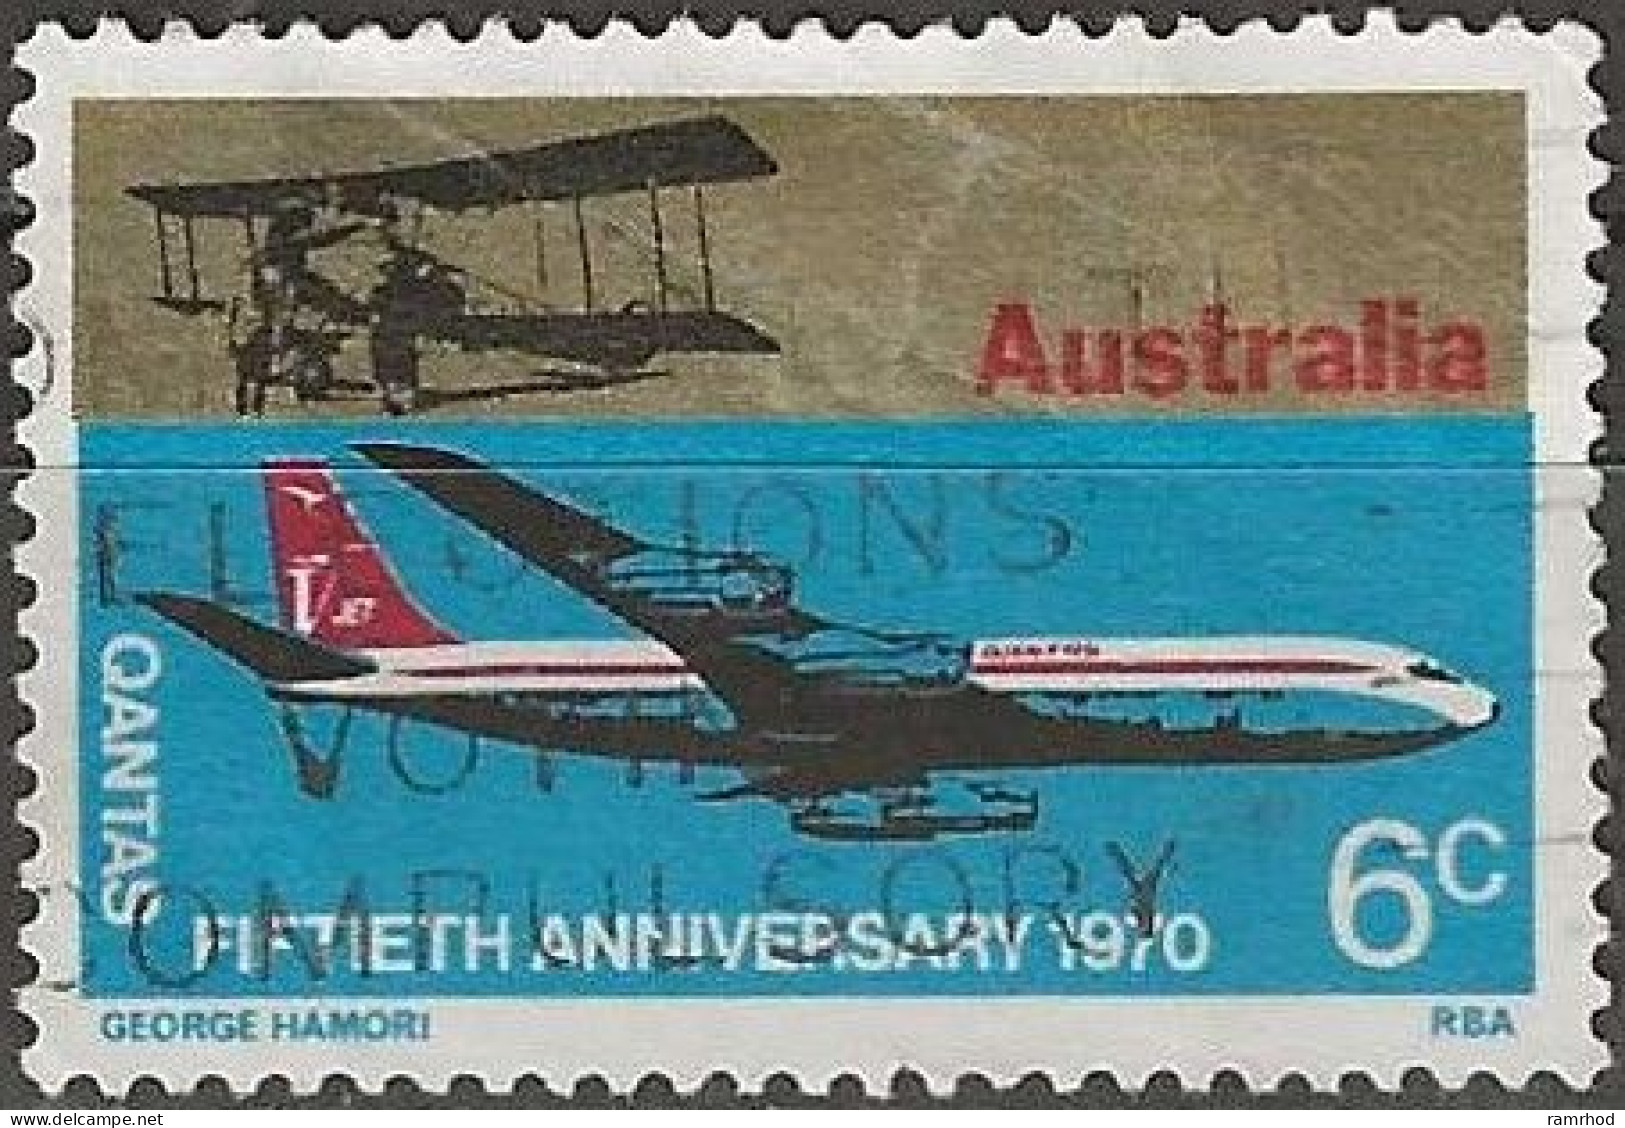 AUSTRALIA 1970 50th Anniversary Of QANTAS Airline - 6c Boeing 707 And Avro 504 FU - Used Stamps